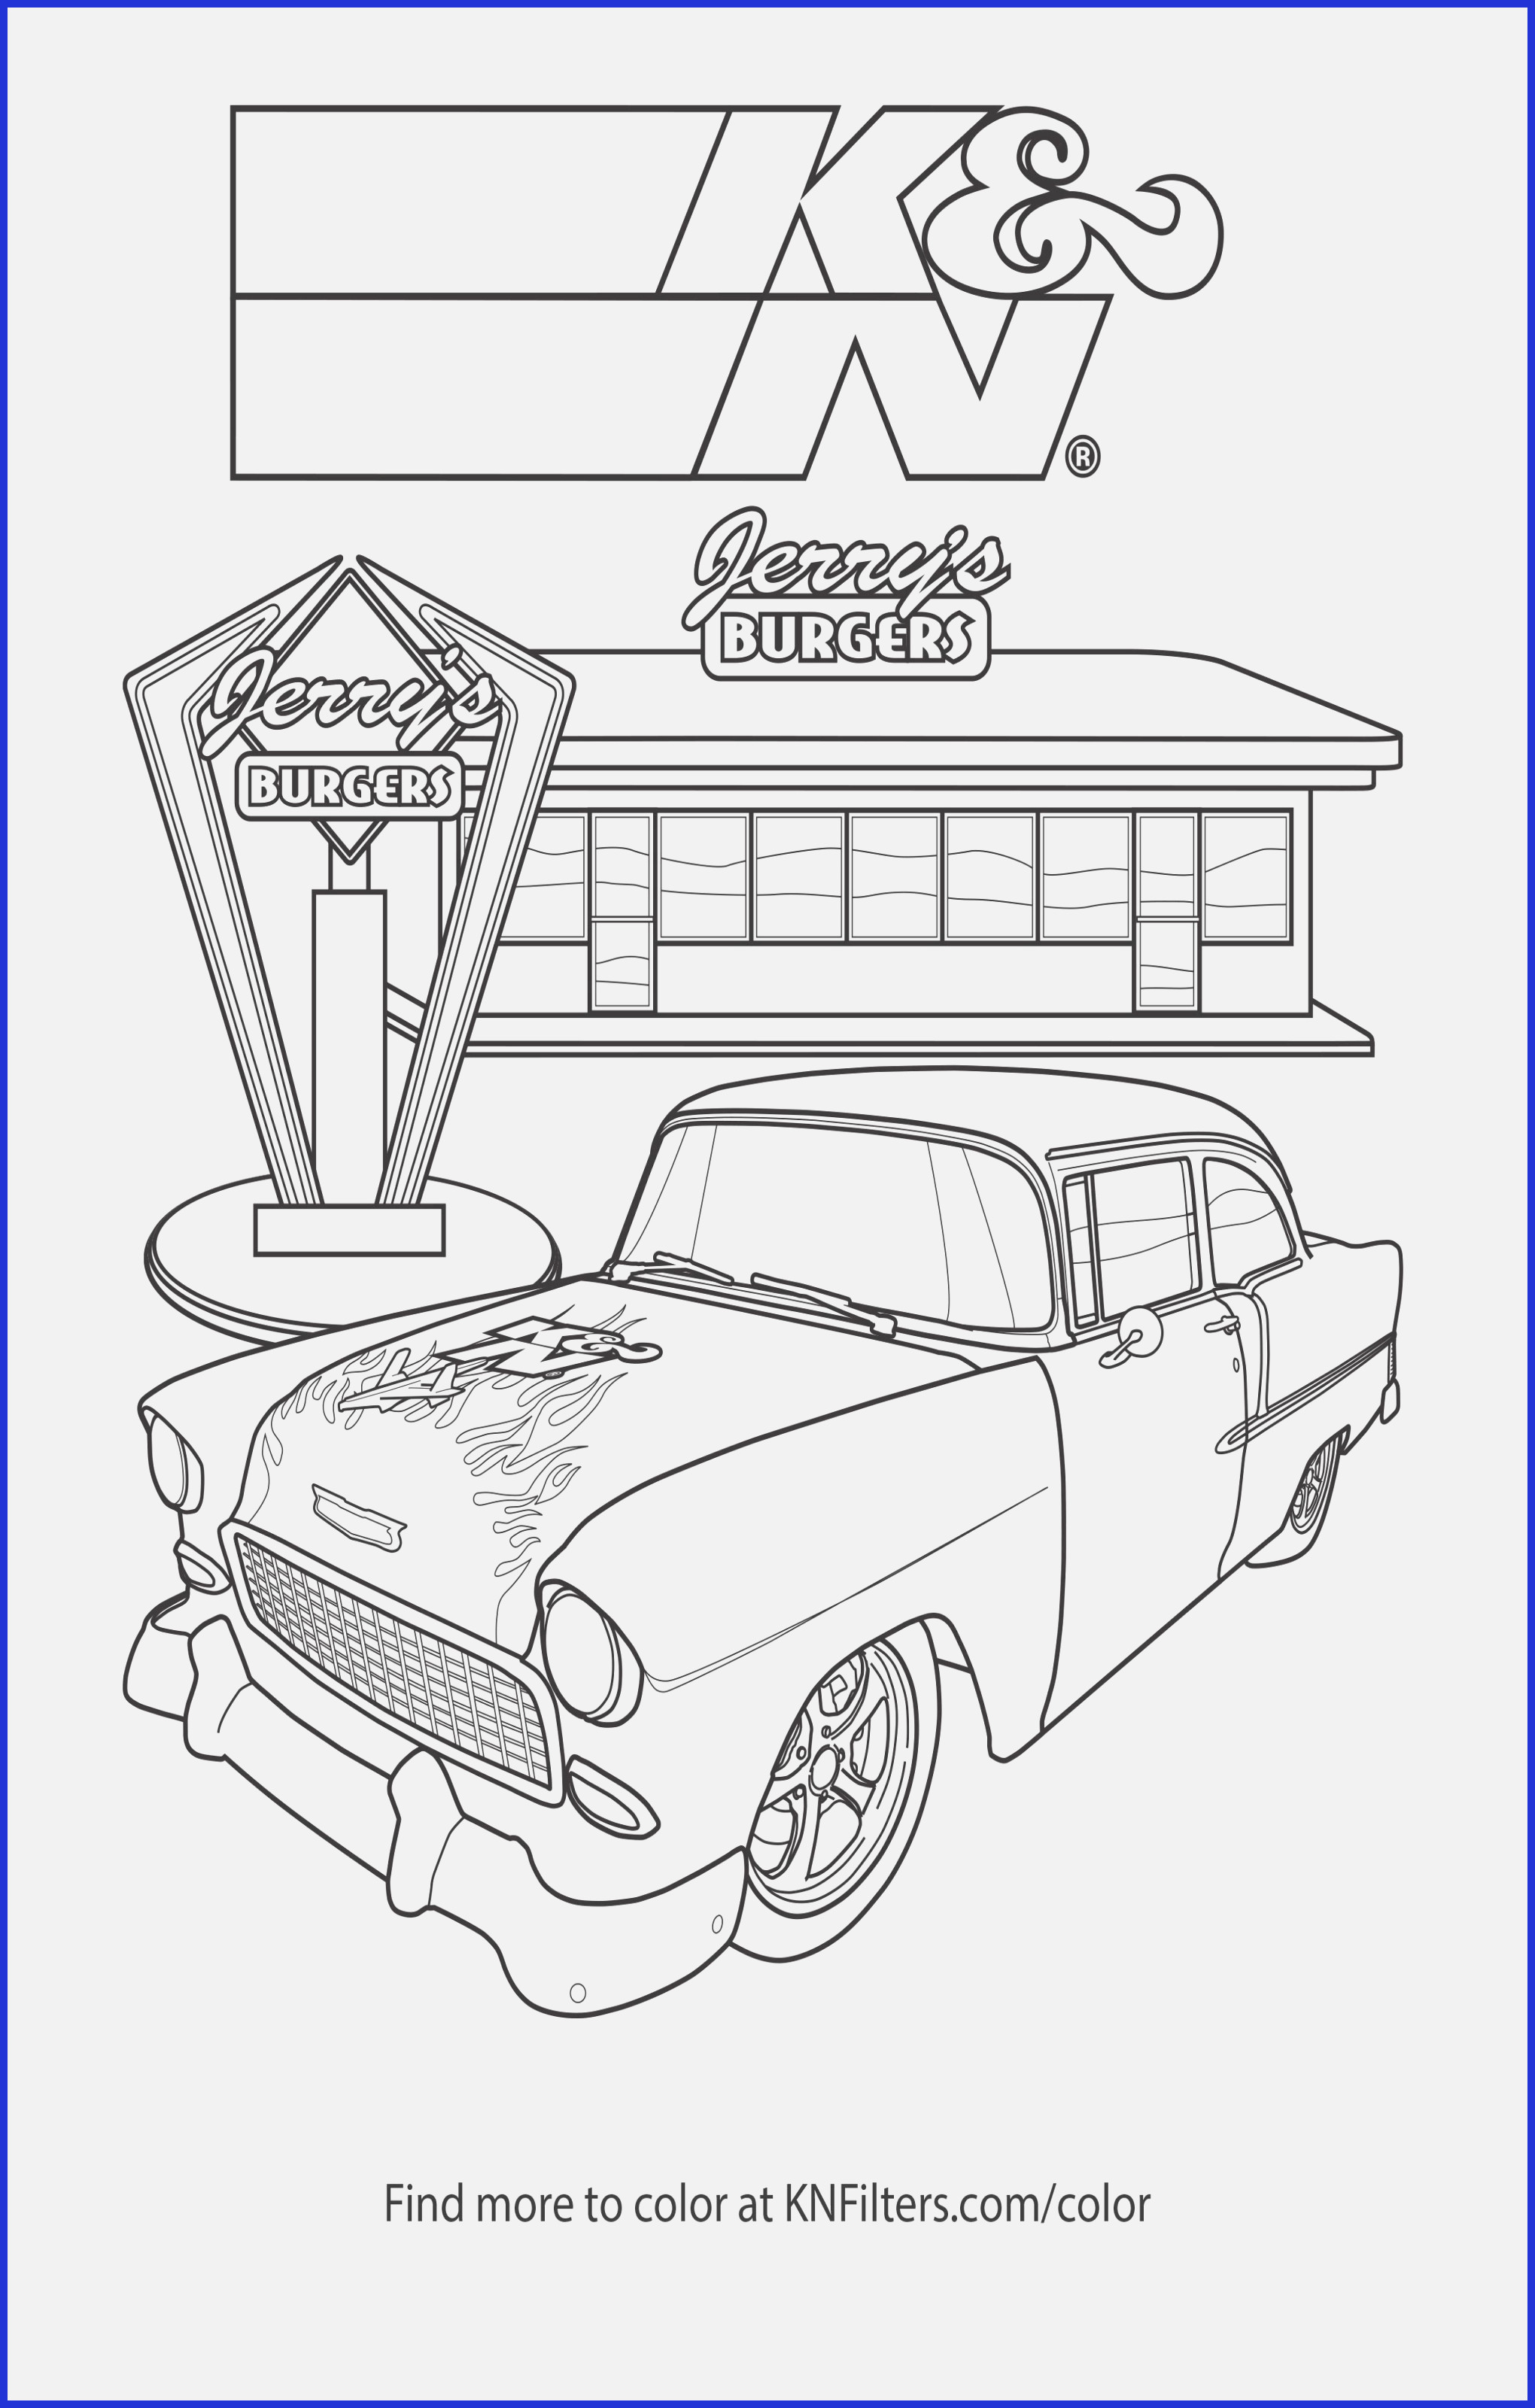 Drag Car Coloring Pages Drag Car Coloring Pages 15 Best Classic Car Coloring Pages Www